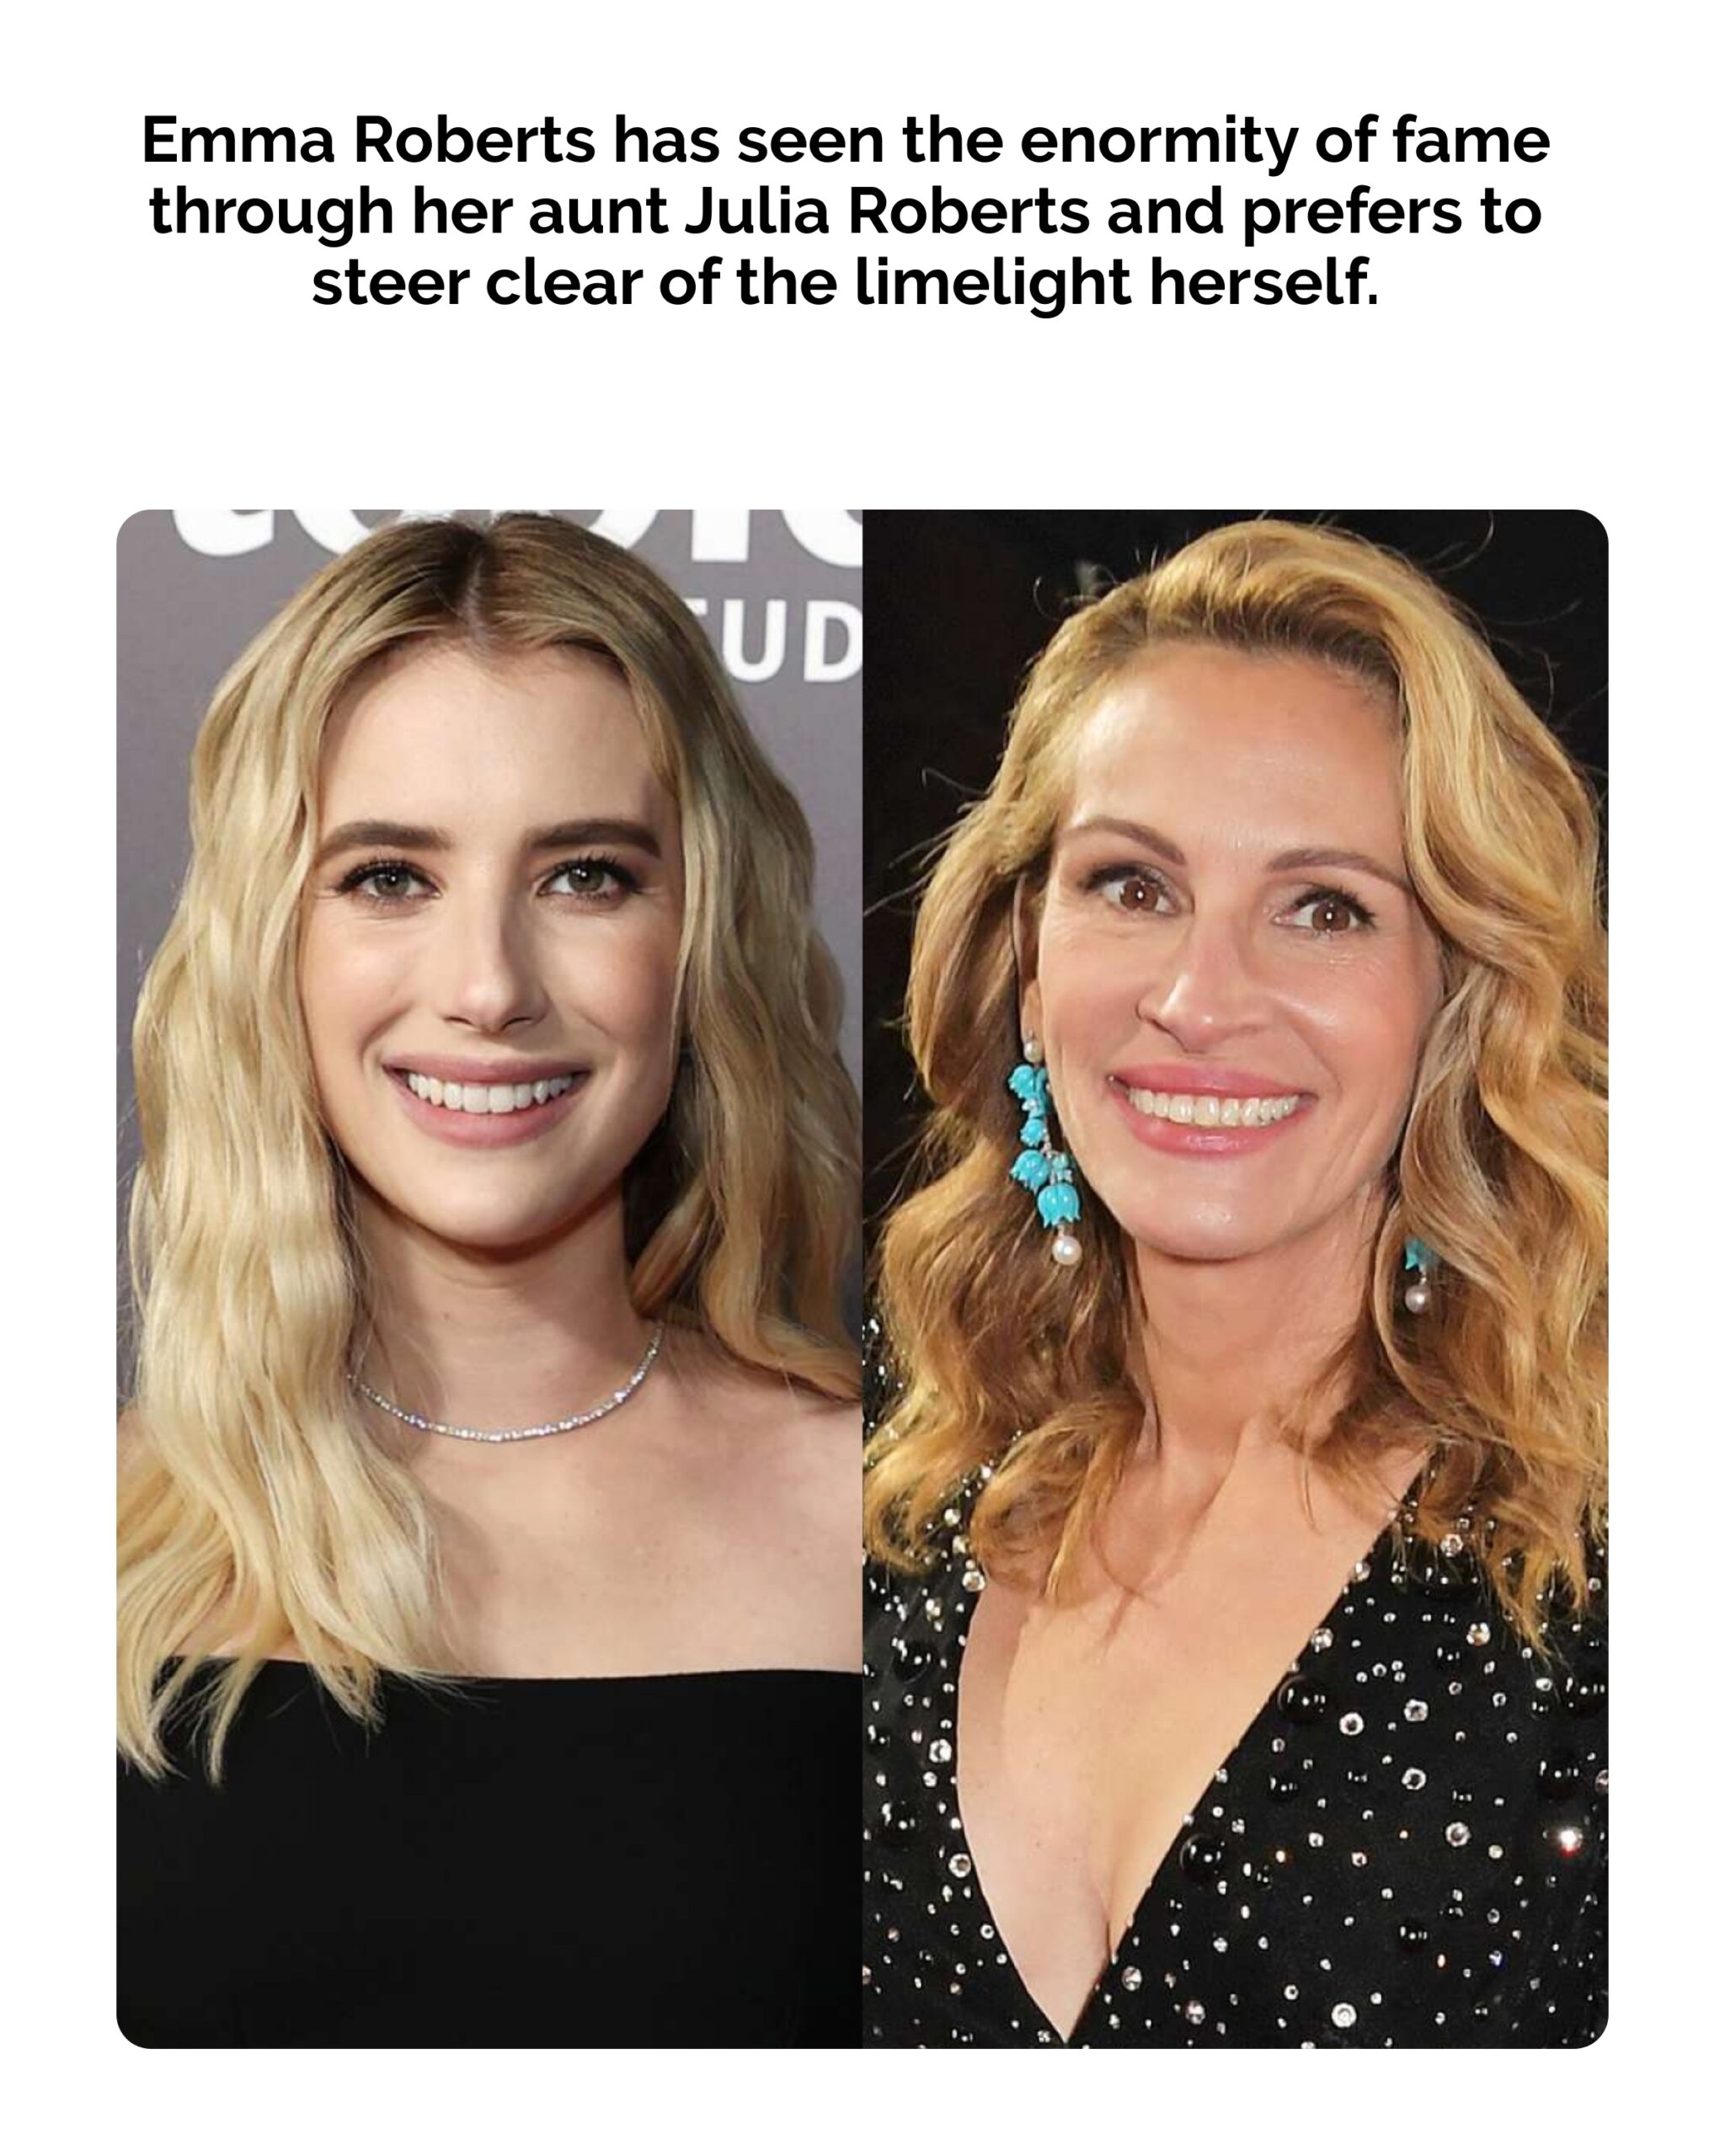 Emma Roberts Says Fame Is Not Her Goal After Seeing Aunt Julia Roberts’ ‘Scary’ Attention ‘Up Close’